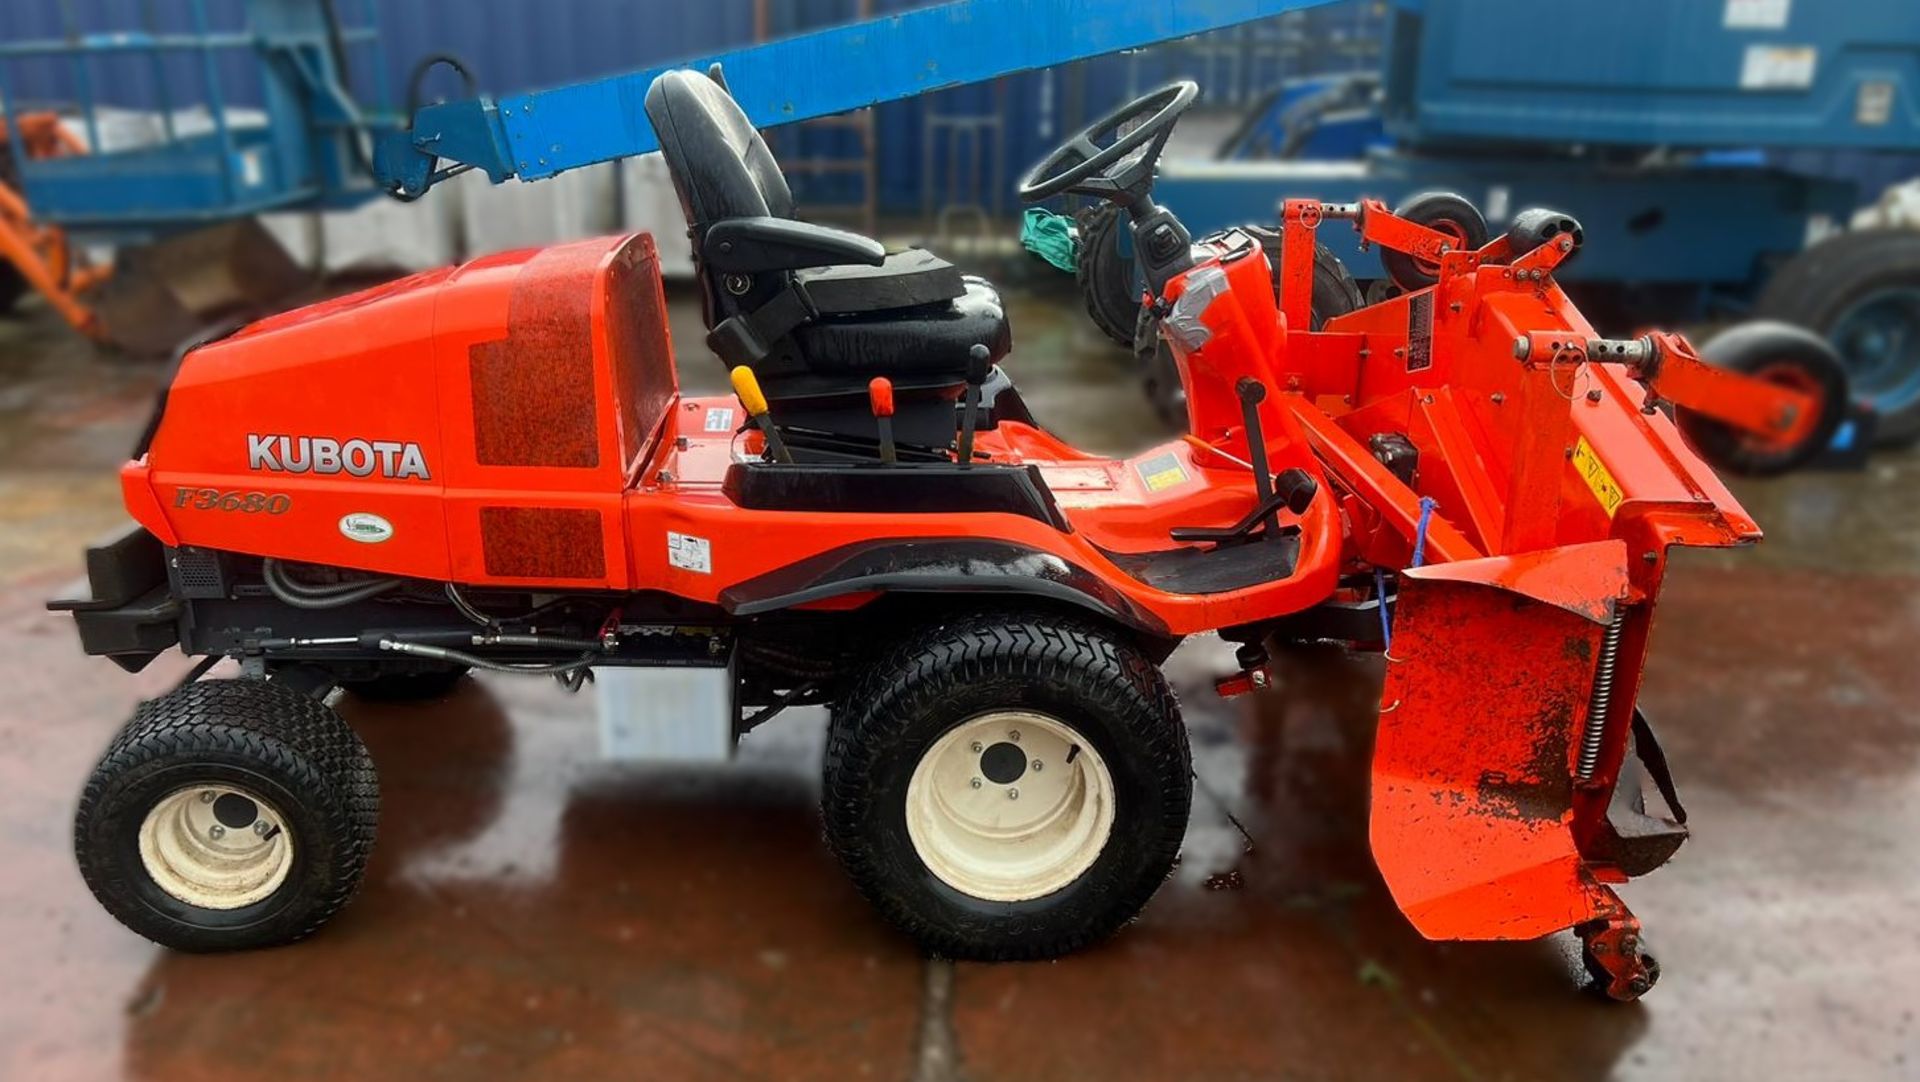 A Kubota F3680-EC 4WD Ride On Mower with 3 blade Mower Deck (one blade missing) and towing hitch, - Image 3 of 13